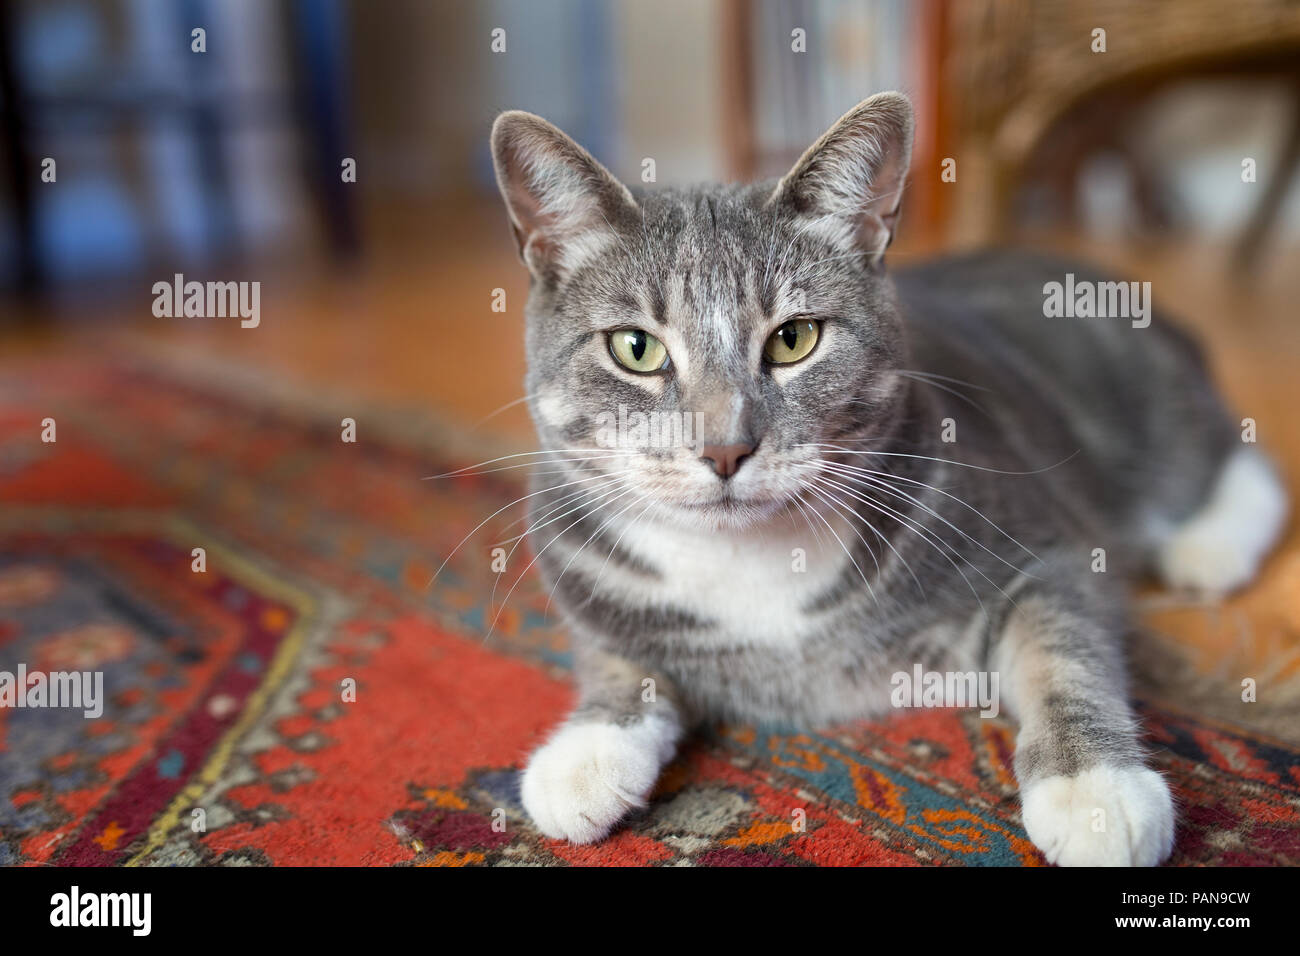 Smiling Grey Tabby Cat Sitting on Red Oriental Rug Indoors Stock Photo